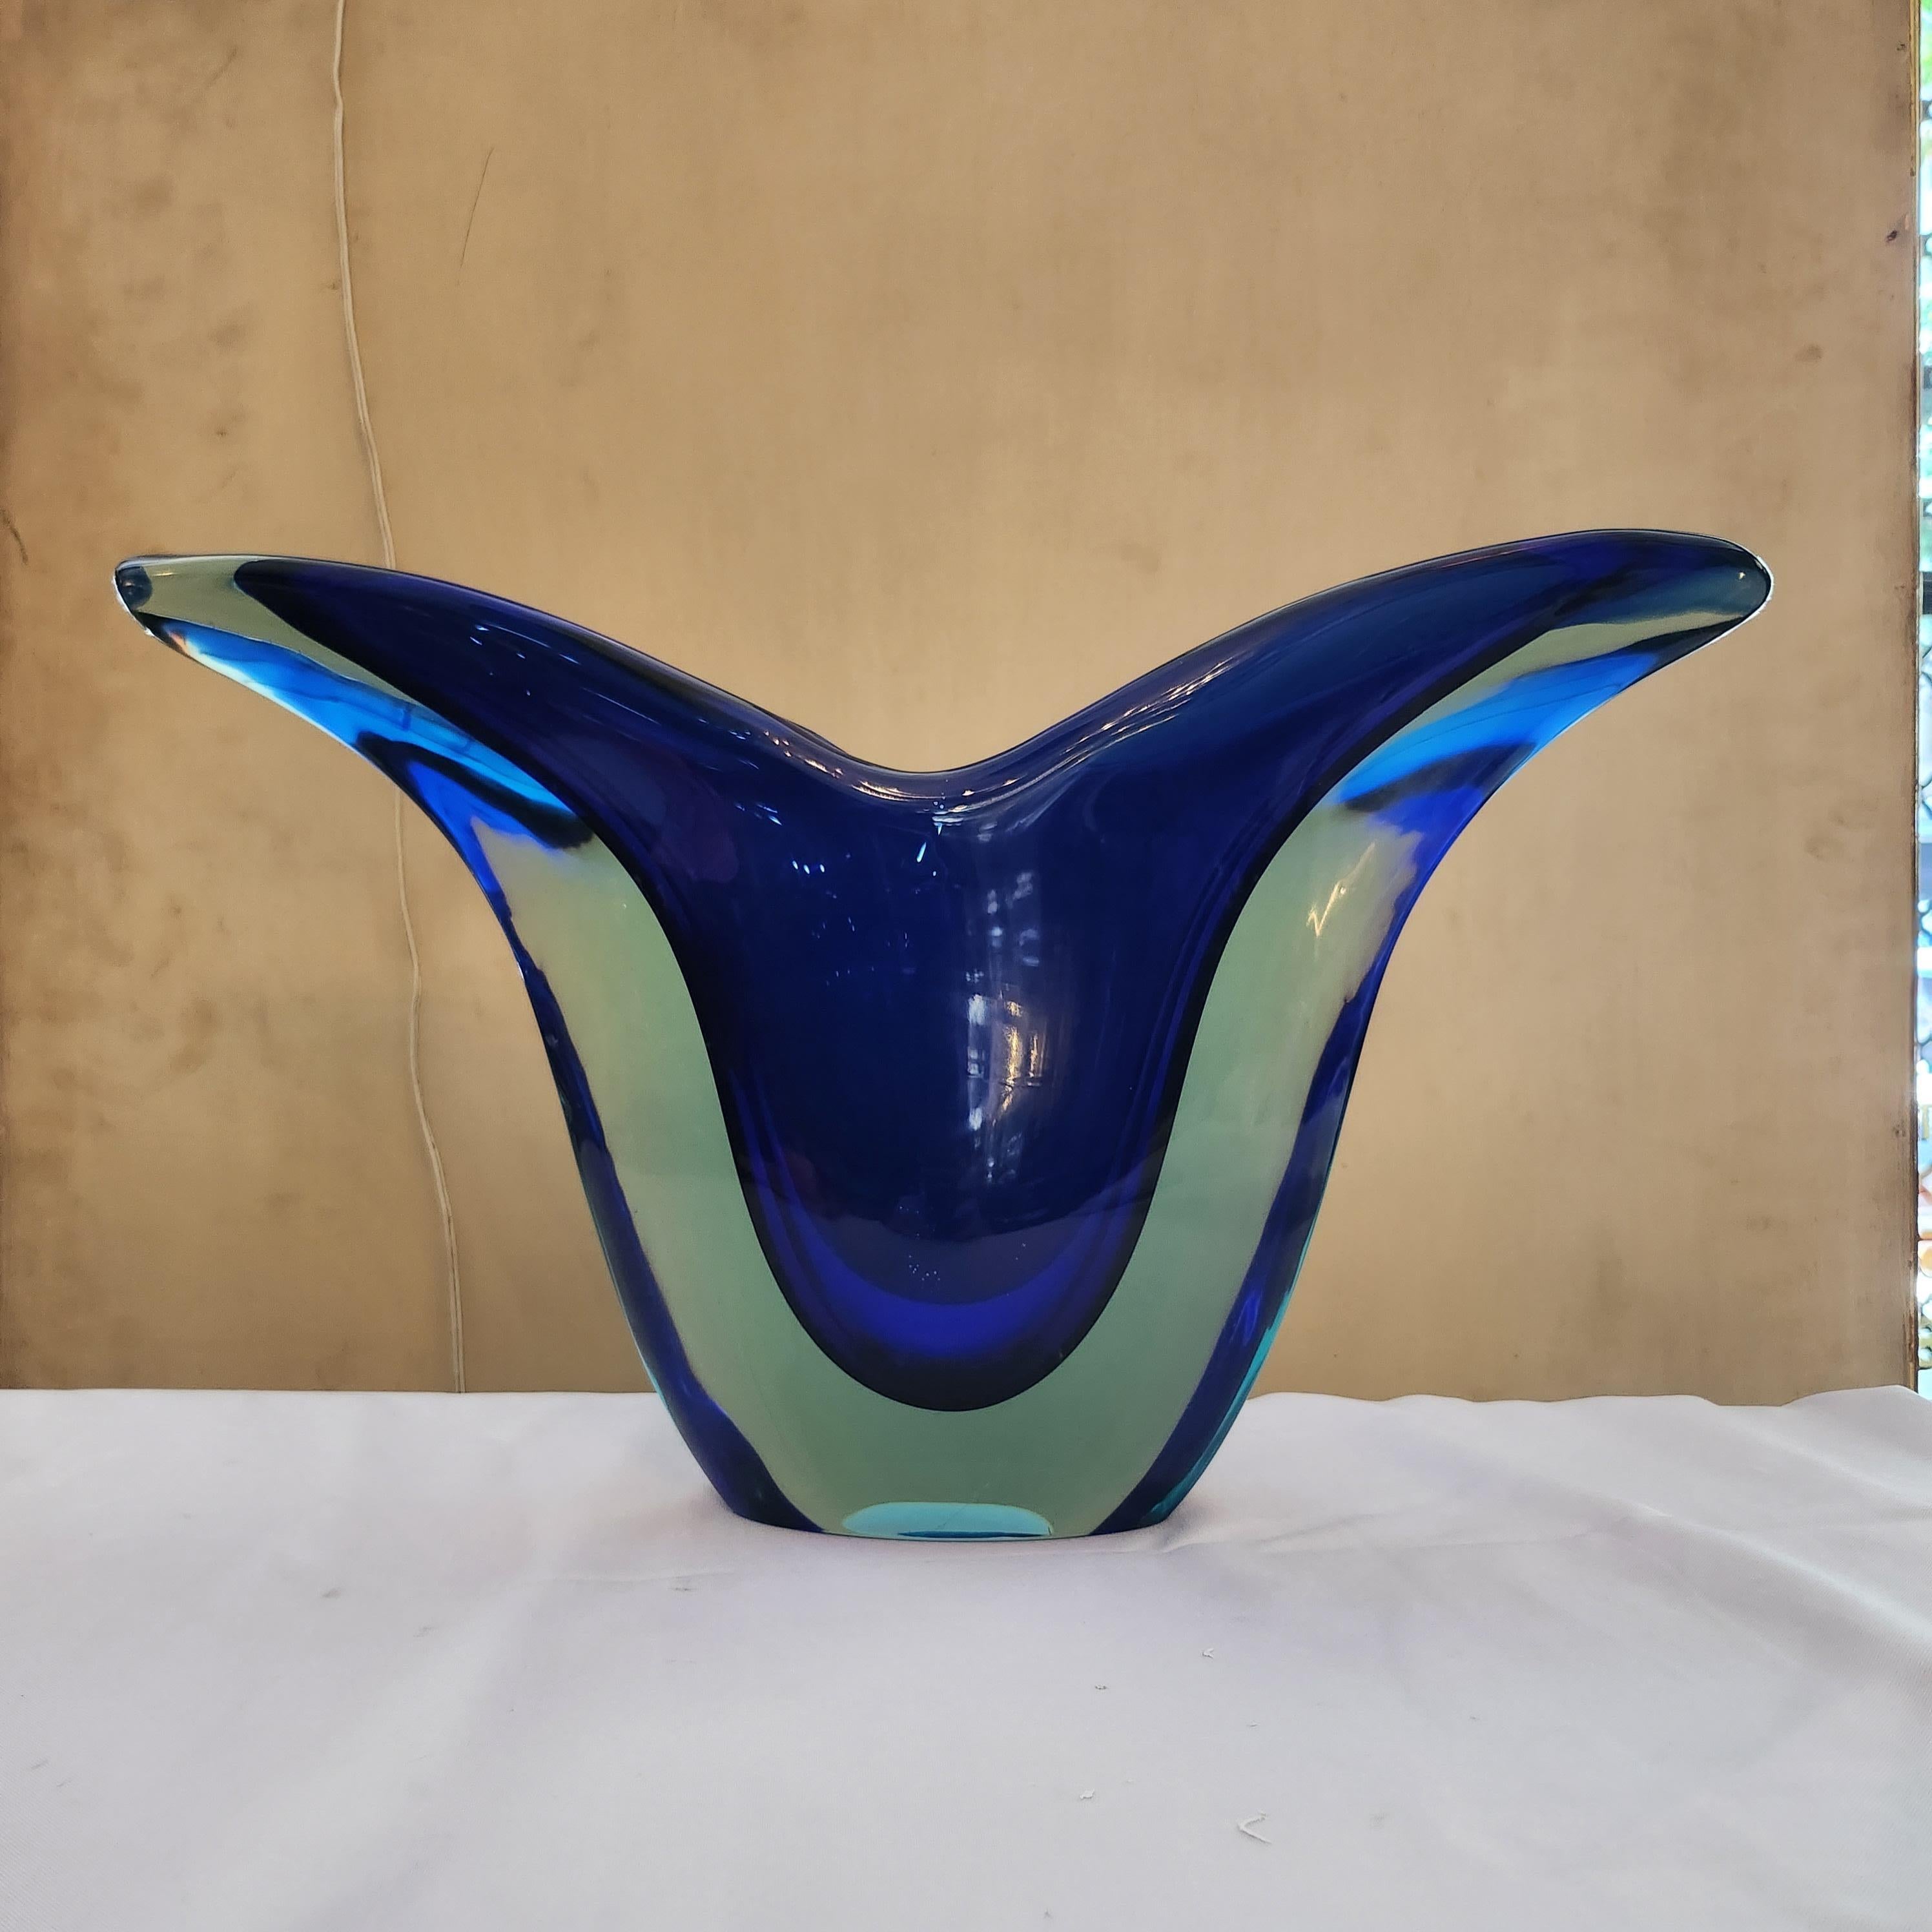 This Flavio Poli sommerso glass vase, dating back to the vibrant era of the 1970s, exudes an air of timeless elegance and sophistication. Crafted in a striking V form, it seamlessly blends shades of deep blue with transparent glass, creating a